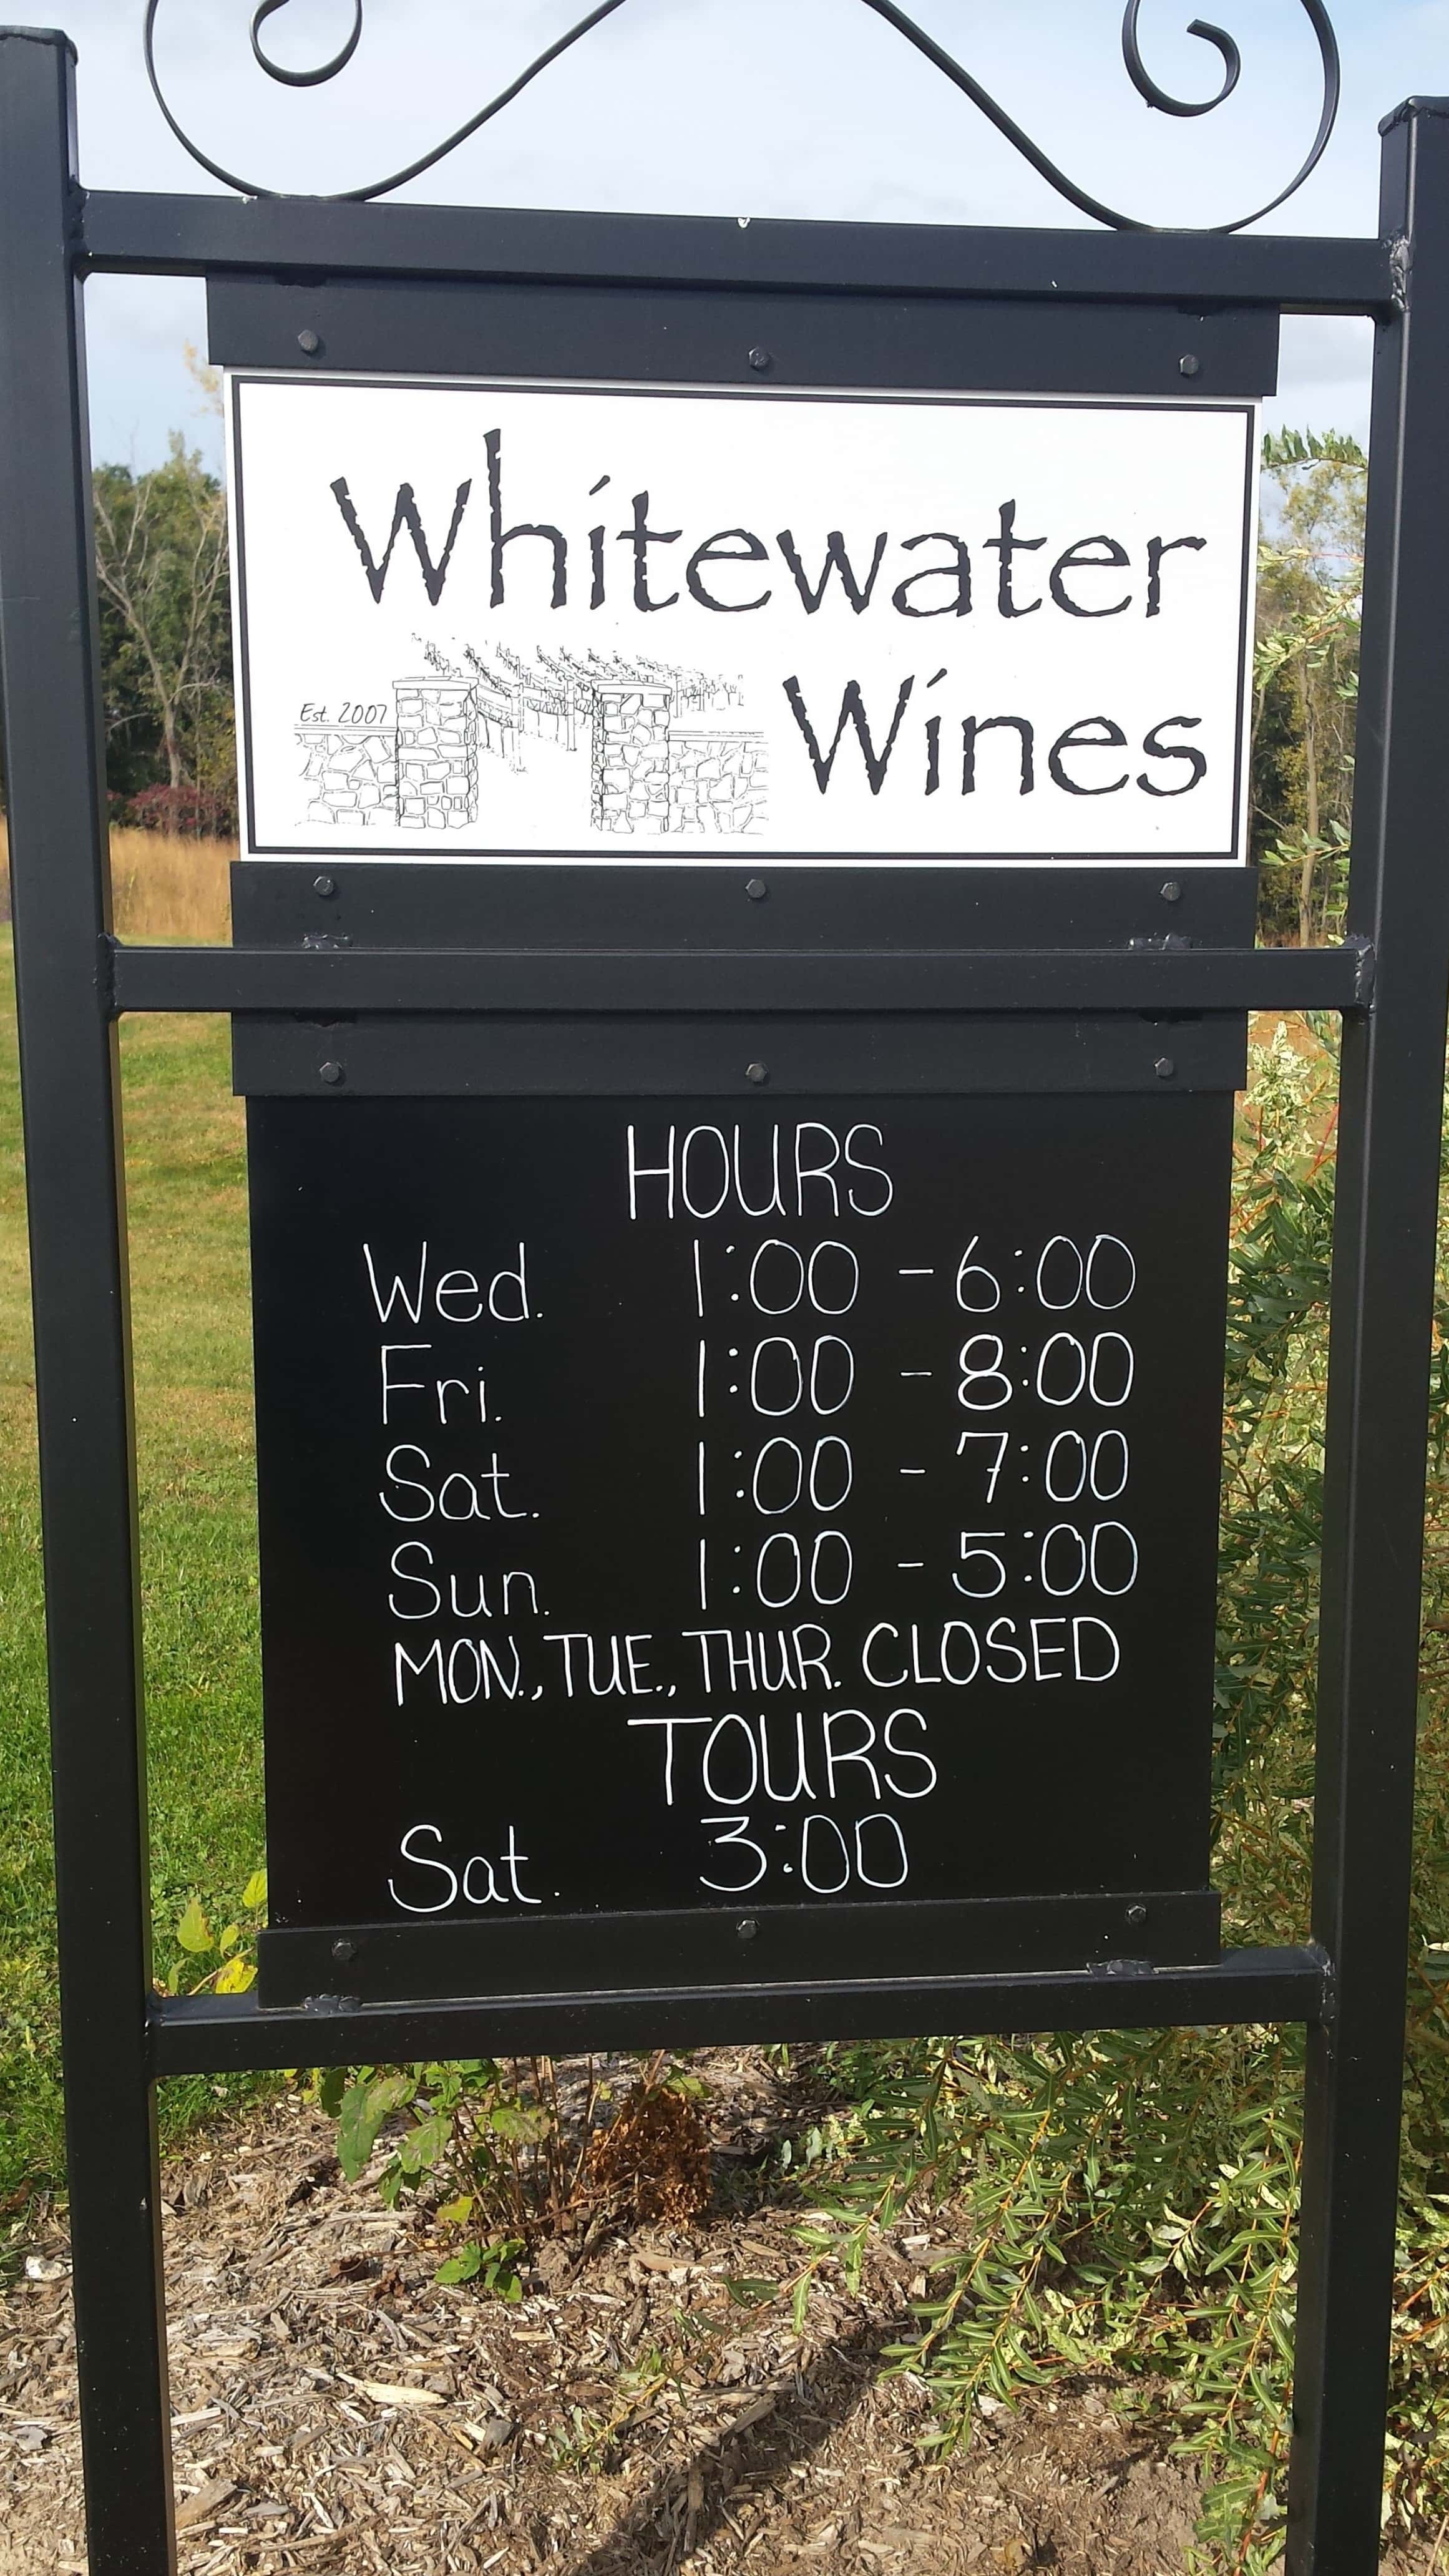 Hours at Whitewater Wines